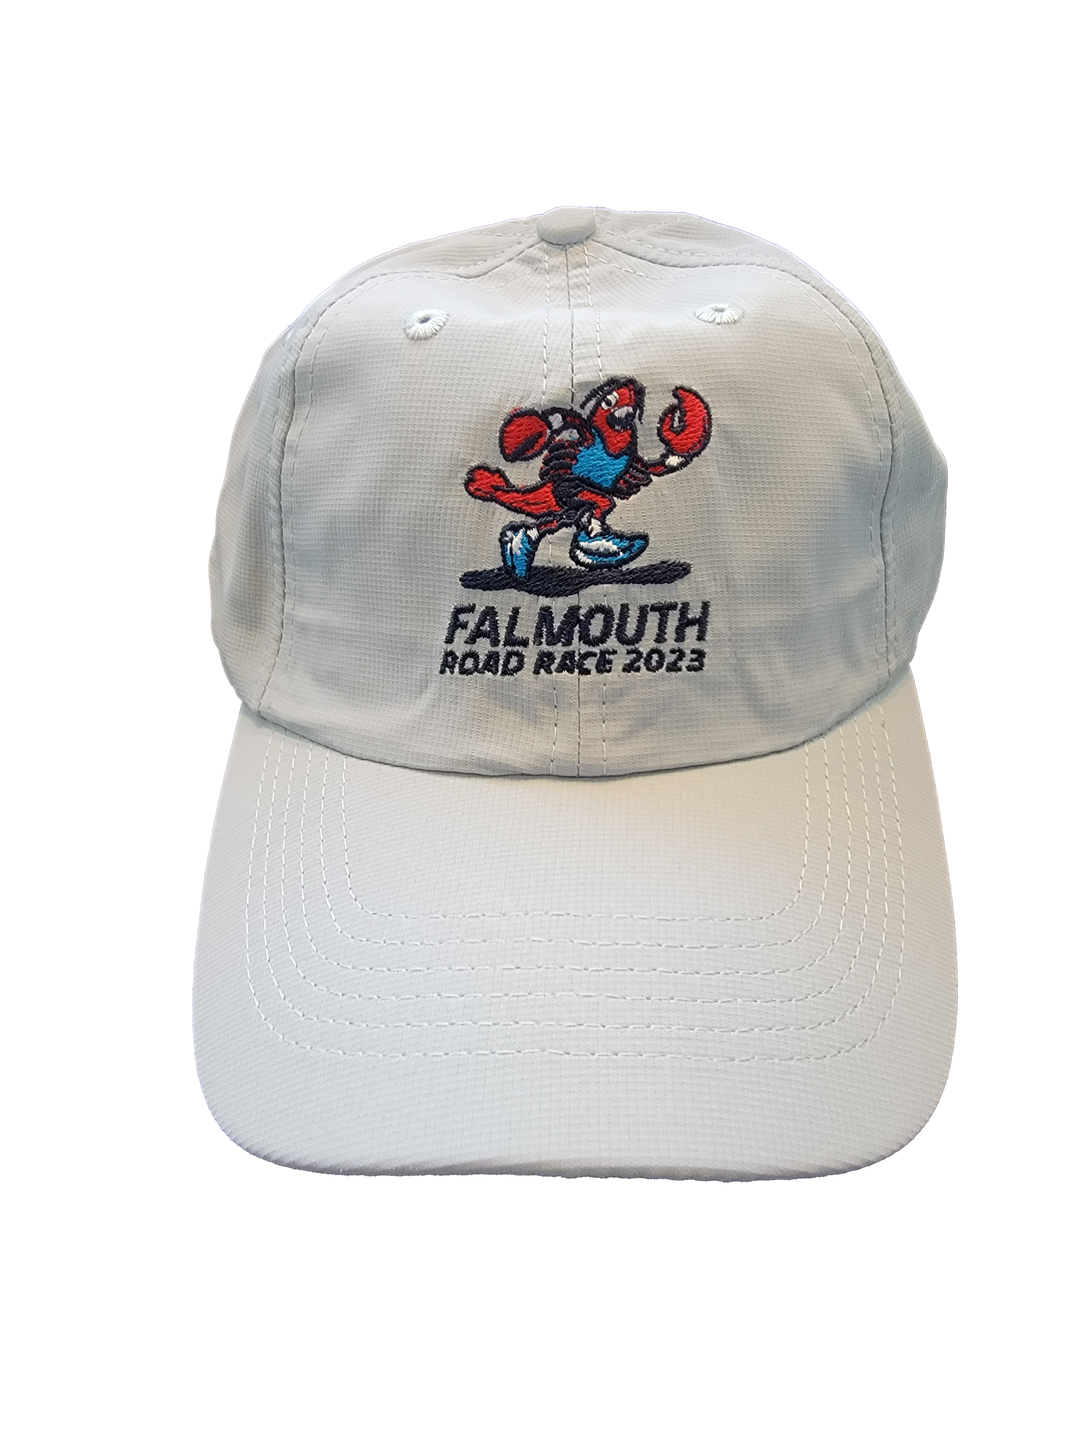 Asics Falmouth Road Race Lobster Grey Hat